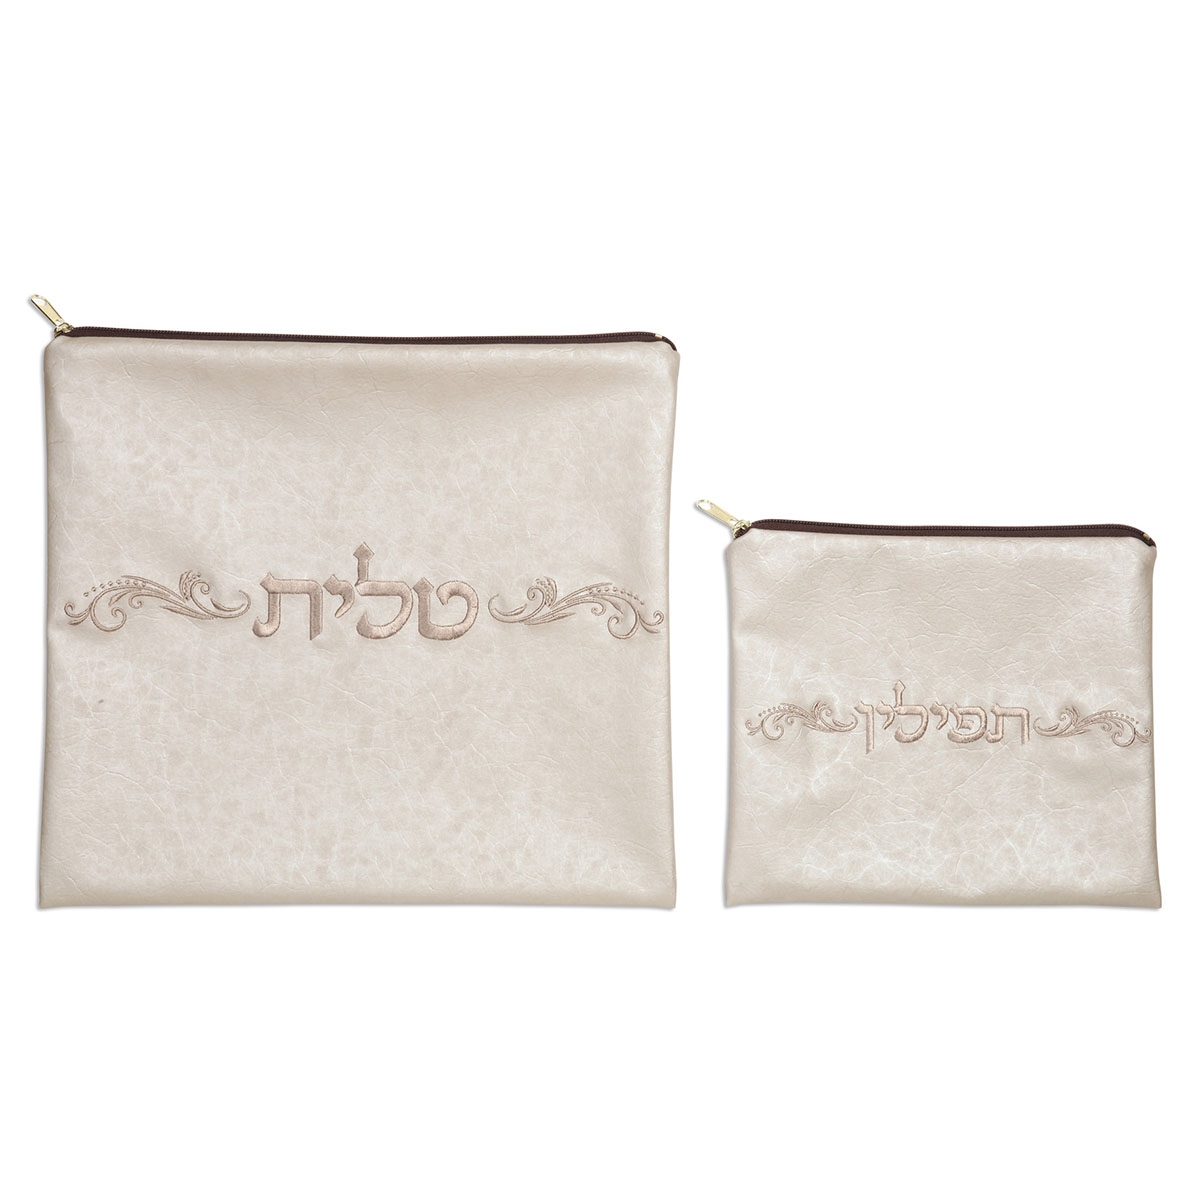 Rikmat Elimelech Faux Leather Off-White Tallit and Tefillin Bag Set  - 1